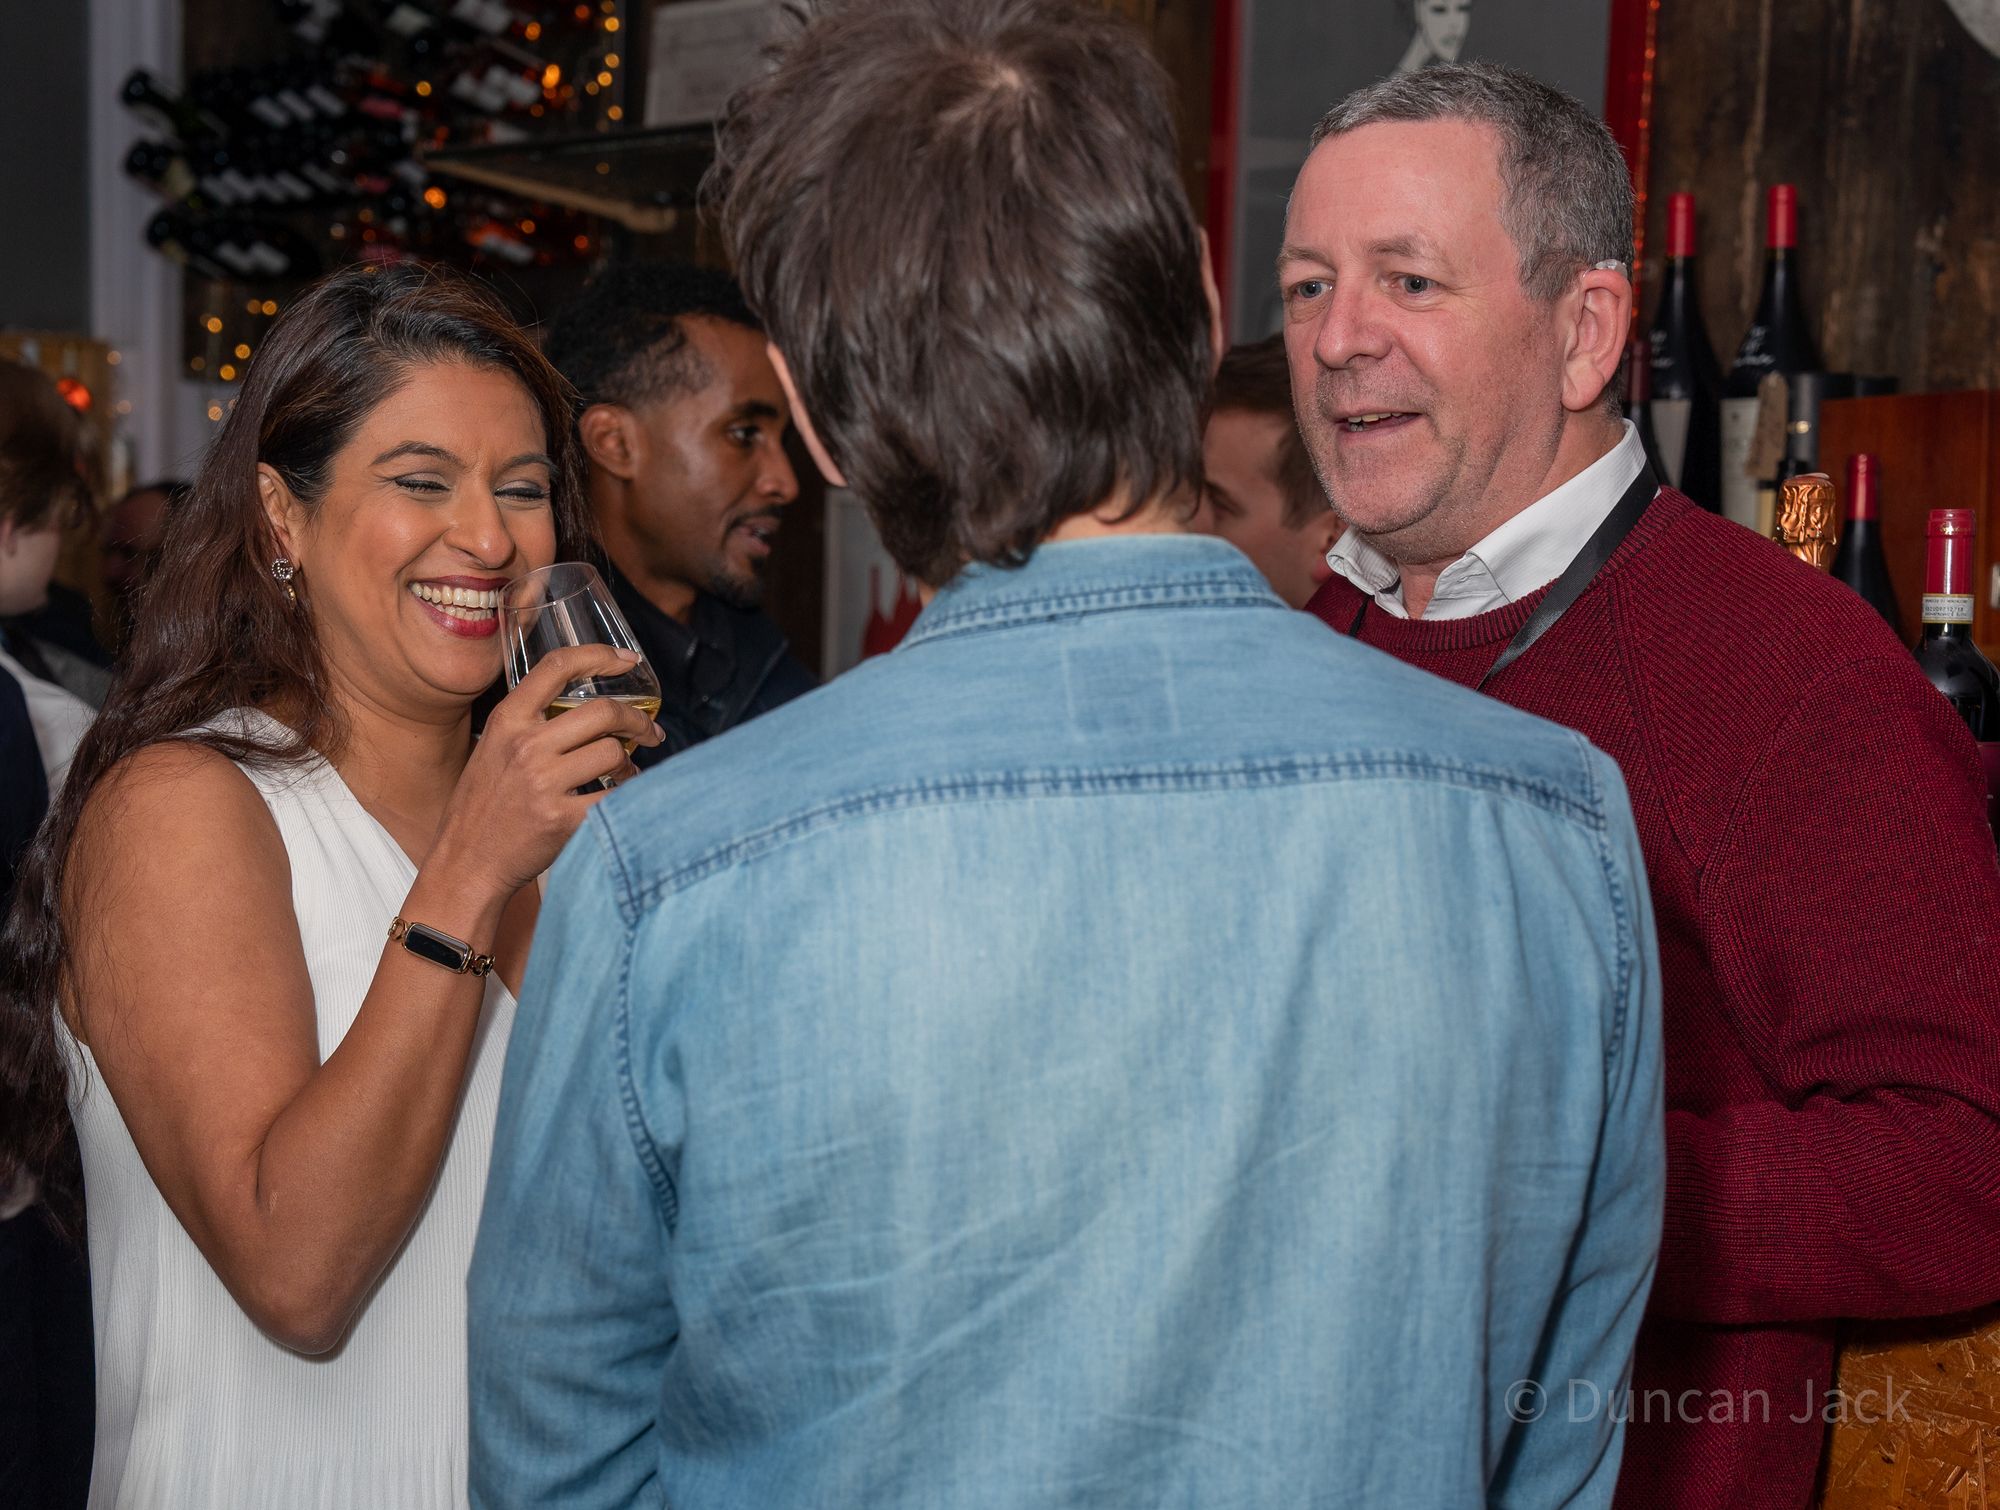 Unlocking Opportunities: A Night of Networking at the Brackenbury Wine Rooms in Hammersmith